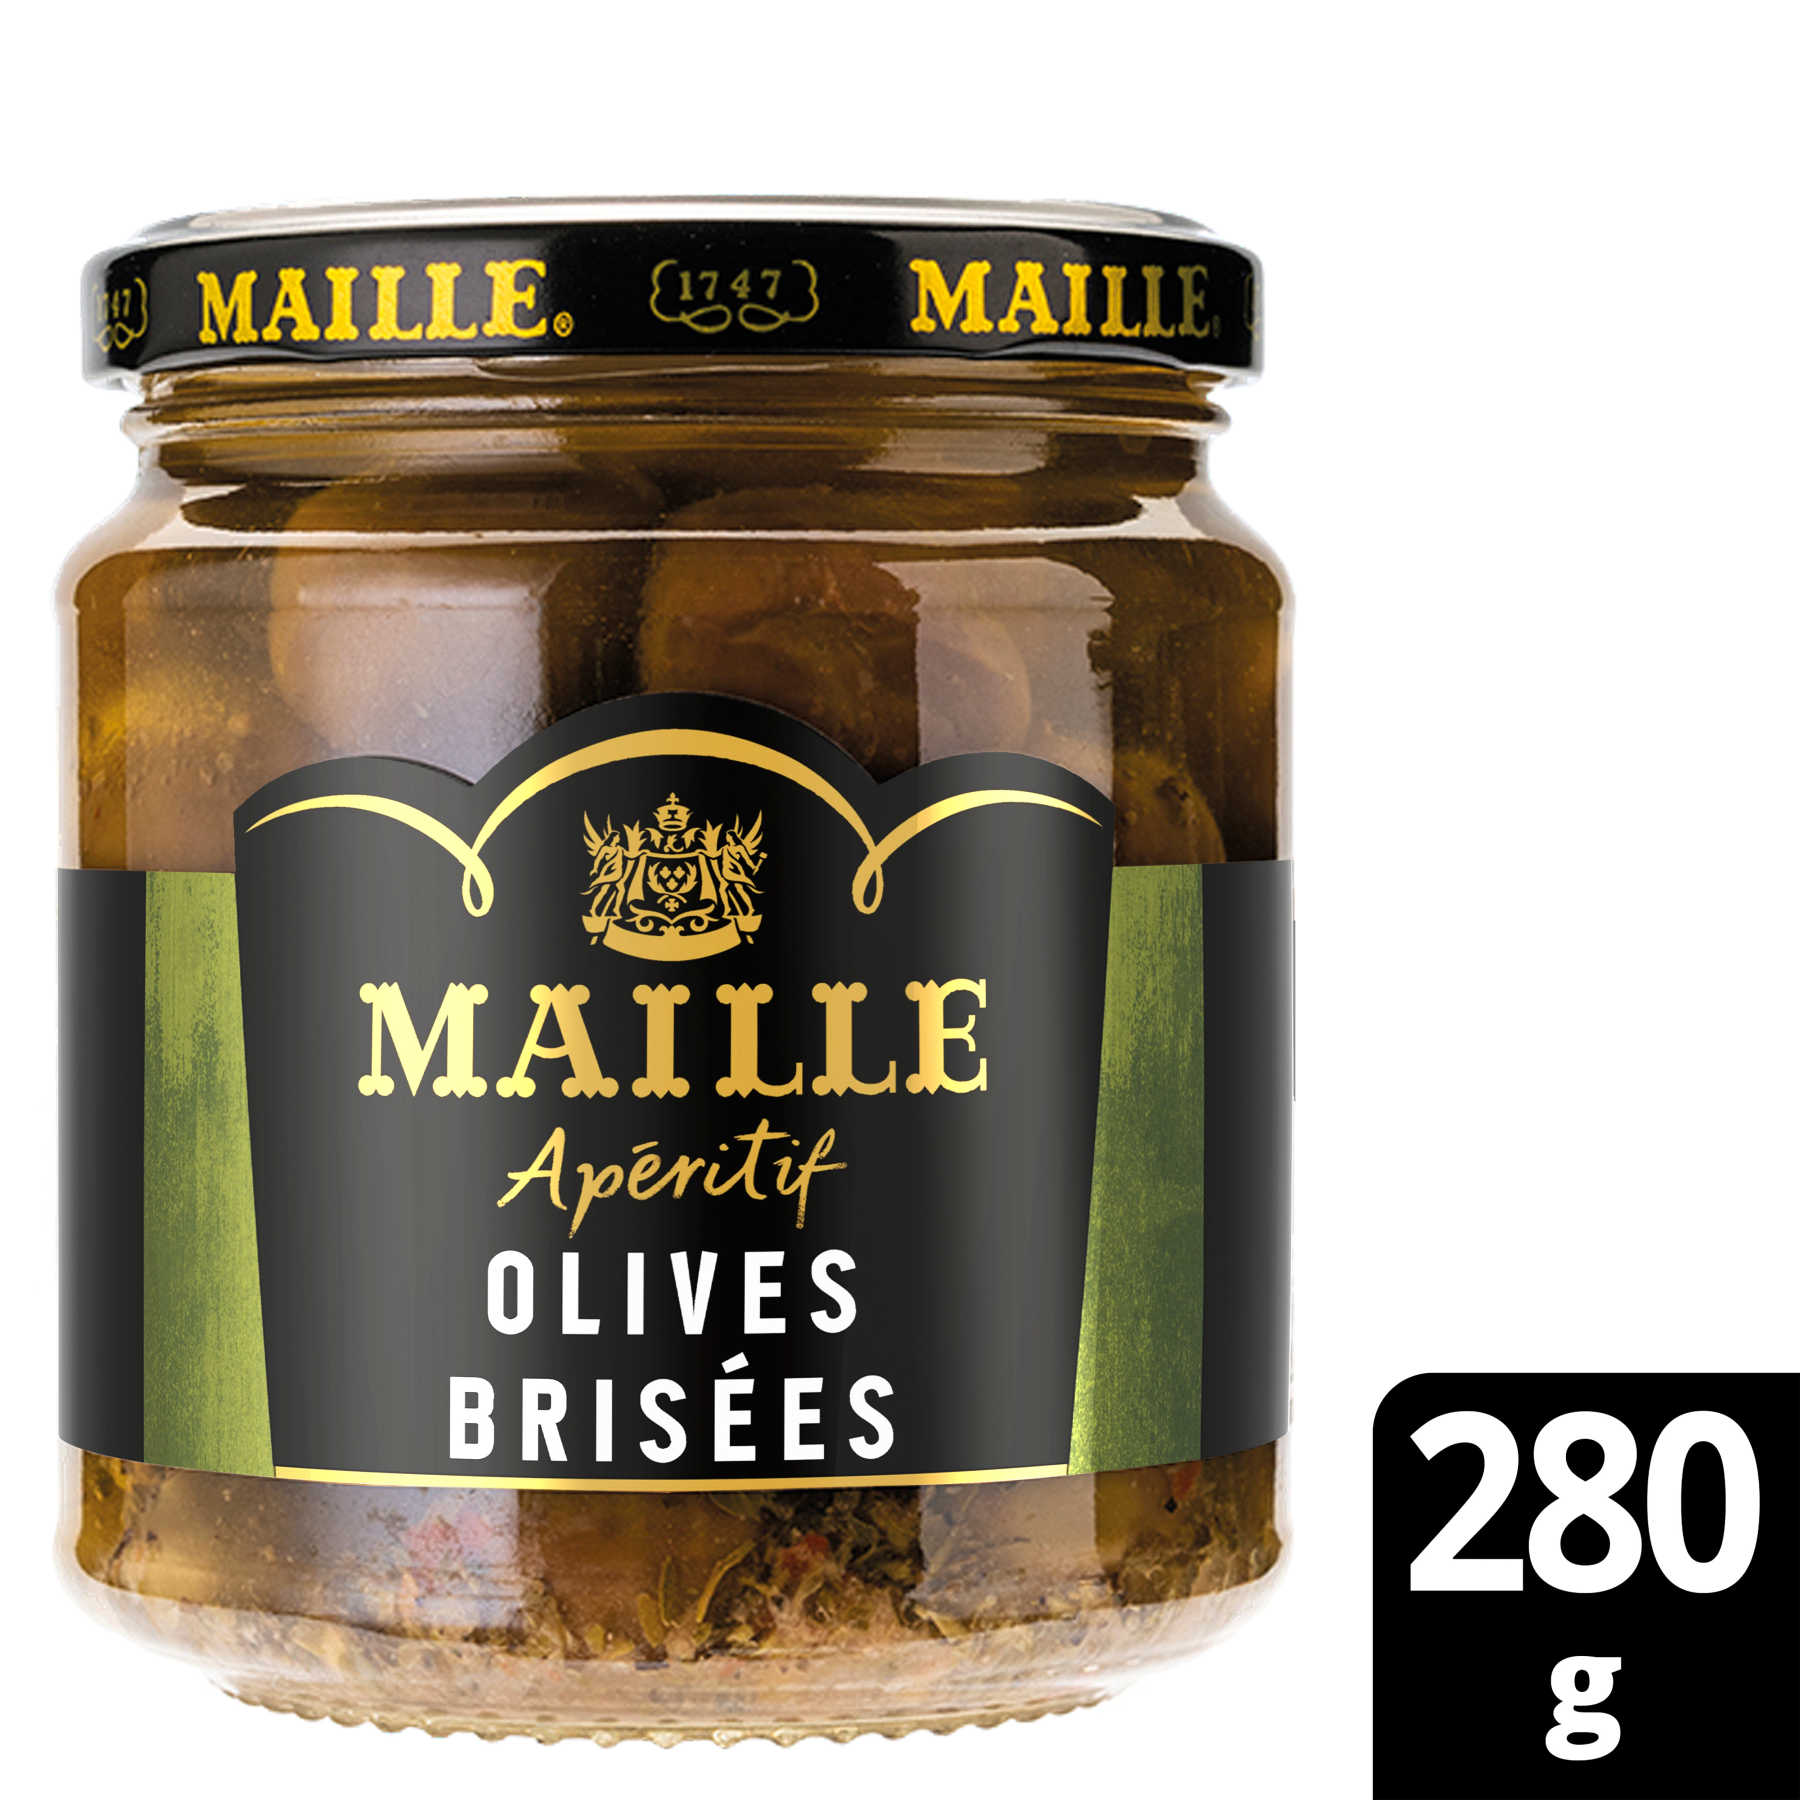 MAILLE APERITIF OLIVES BRISEES, 280G